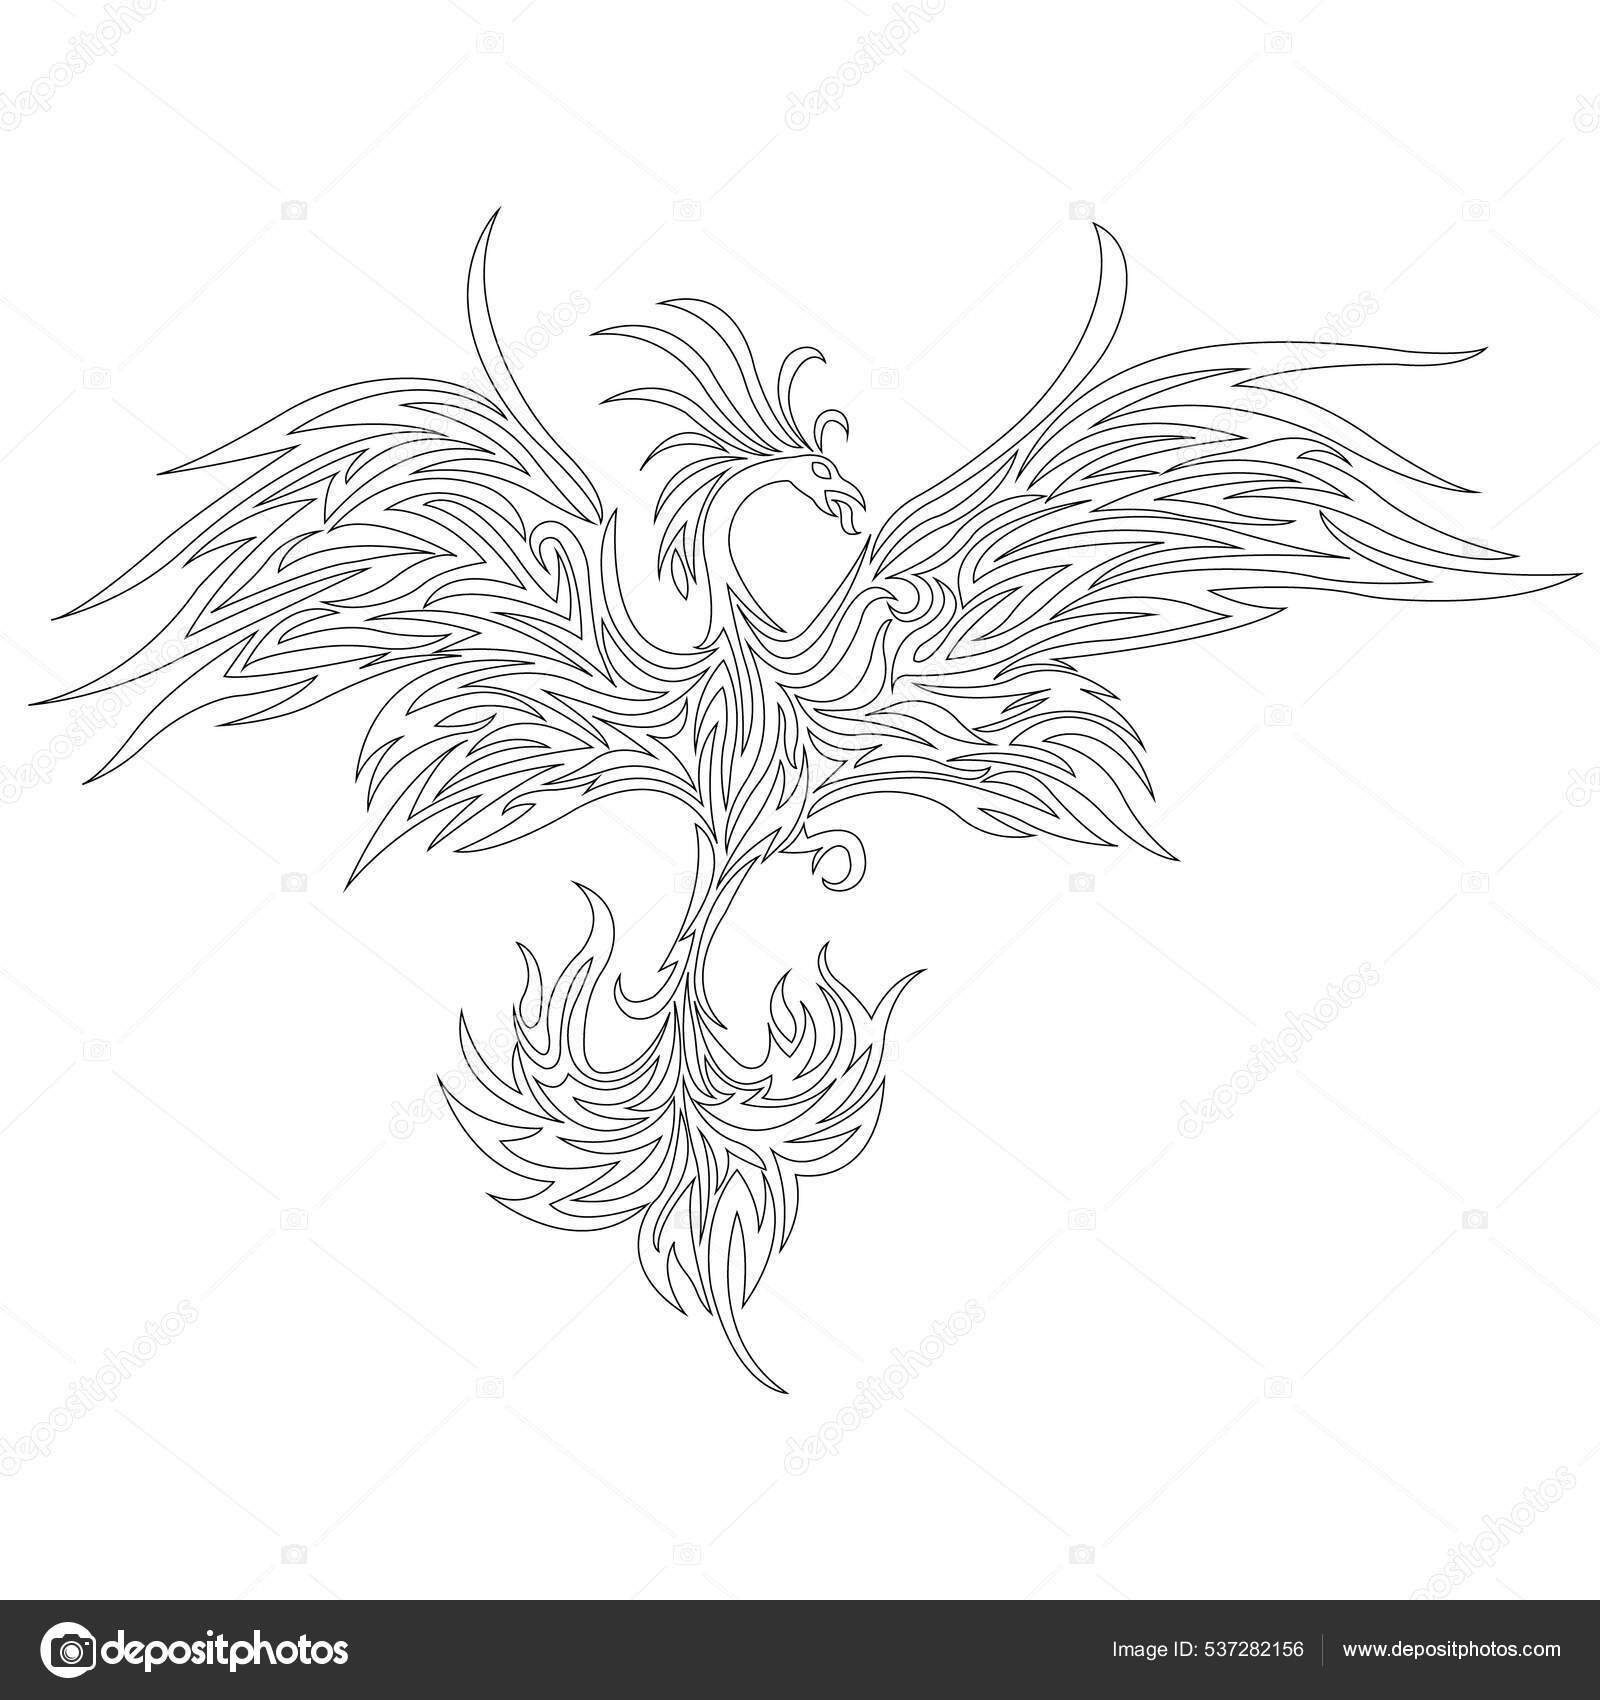 Phoenix hand drawn sketch mythical birds Vector Image